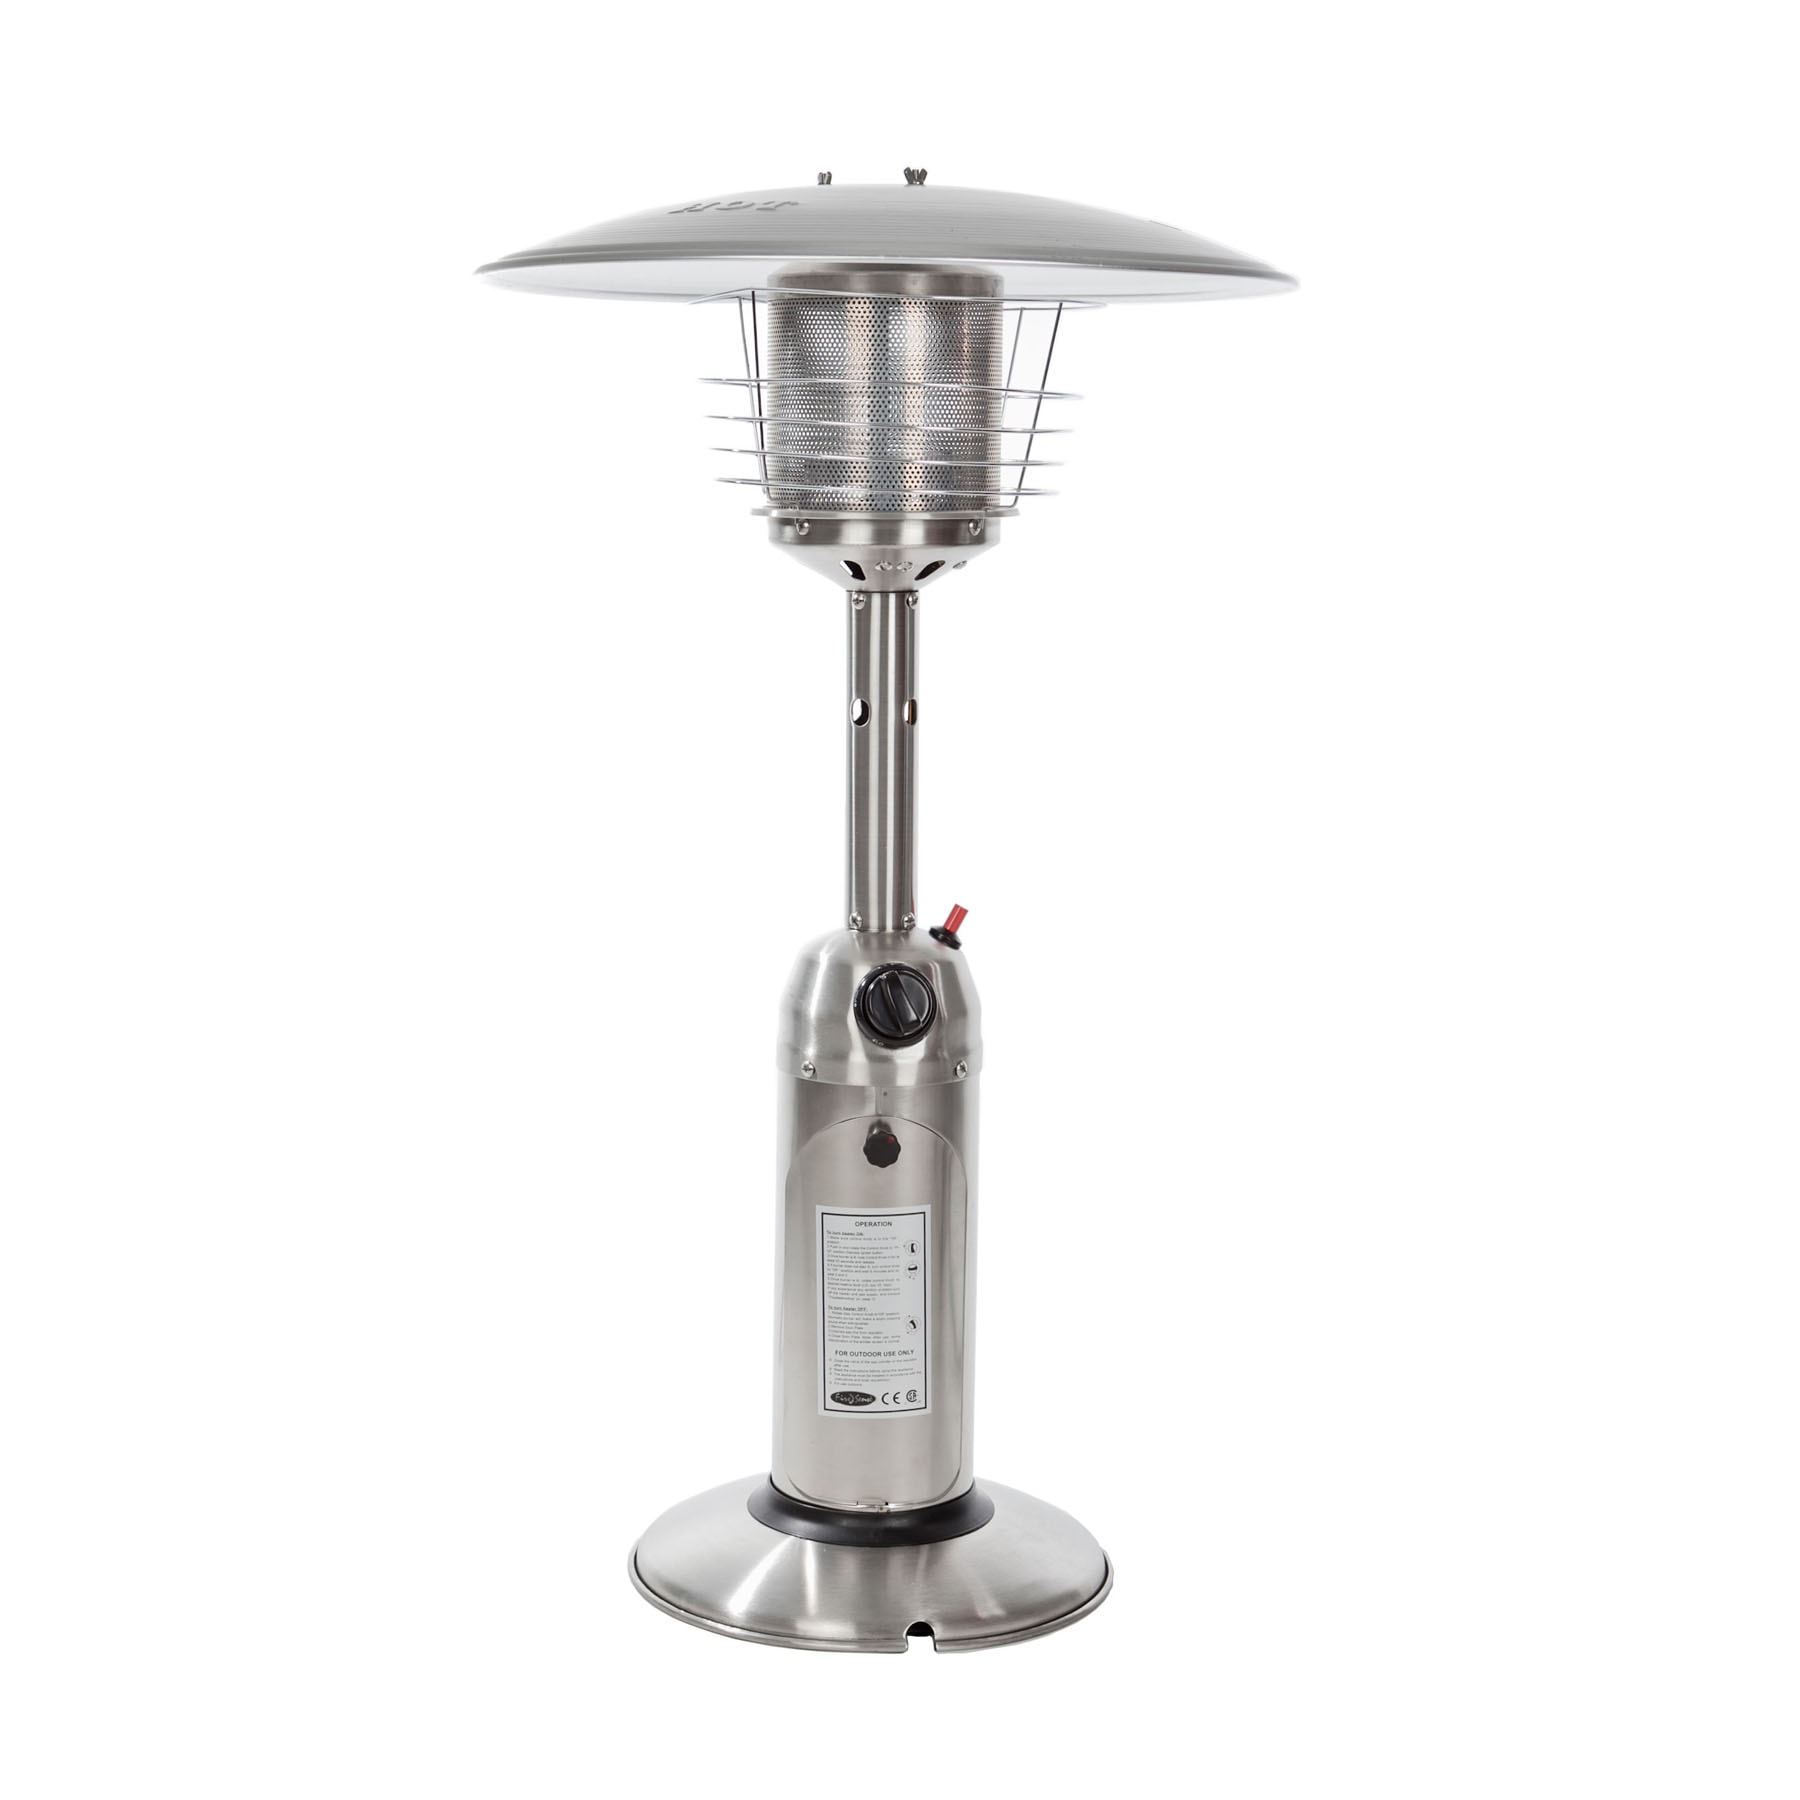 IKevan_ 3000W 10,000 BTU Outdoors Portable Patio Heater Stainless Steel Vertical Floor Standing Gas Heater for Balcony Camping Outdoor Propane Table Top Heater with The Gas Safety Shut-Off Switch 